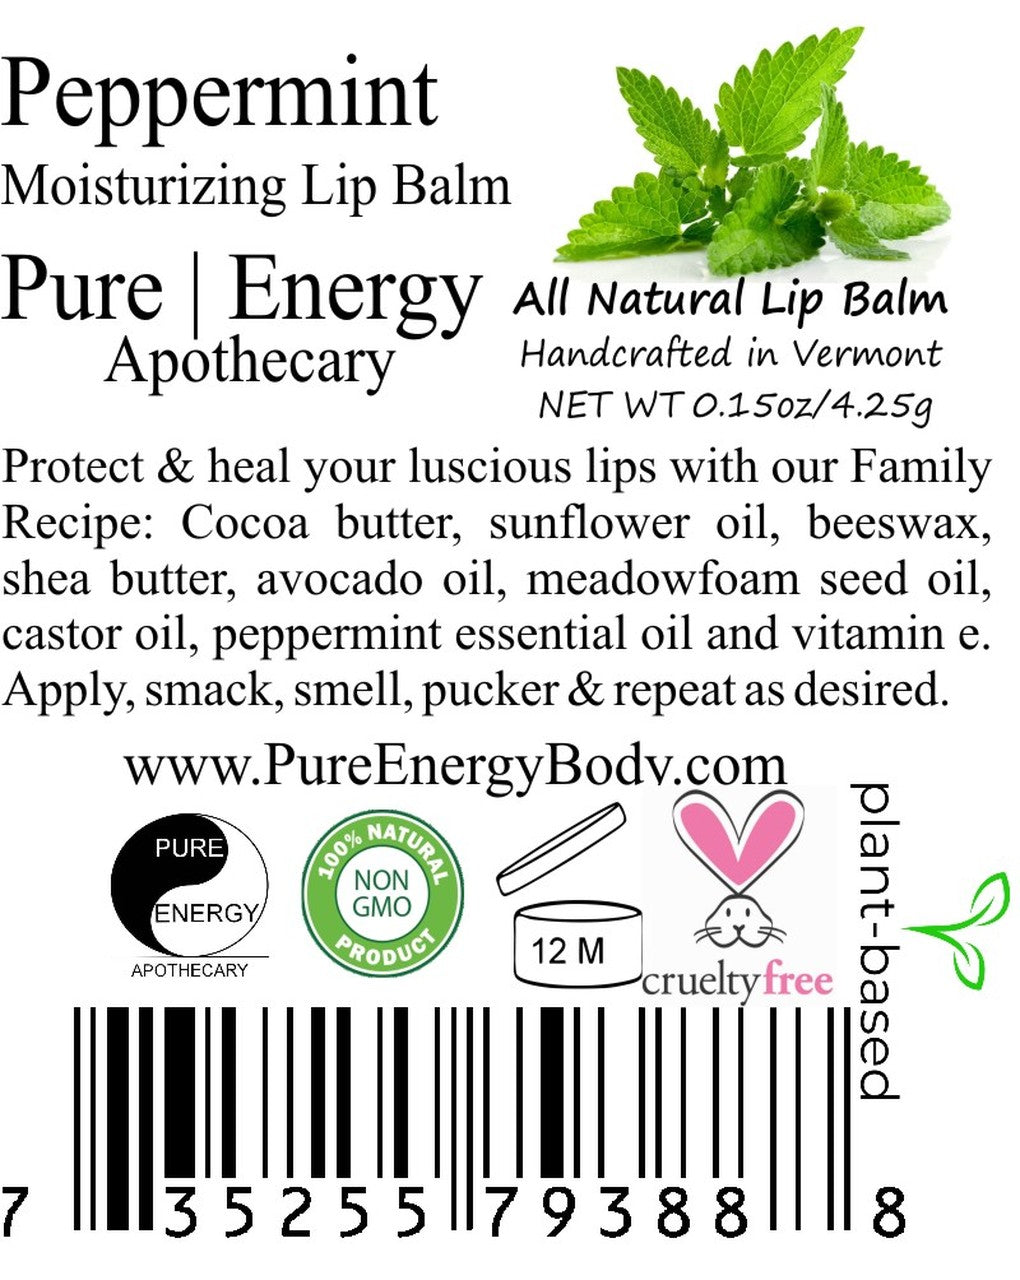 Pure Energy Apothecary Peppermint Lip Balm